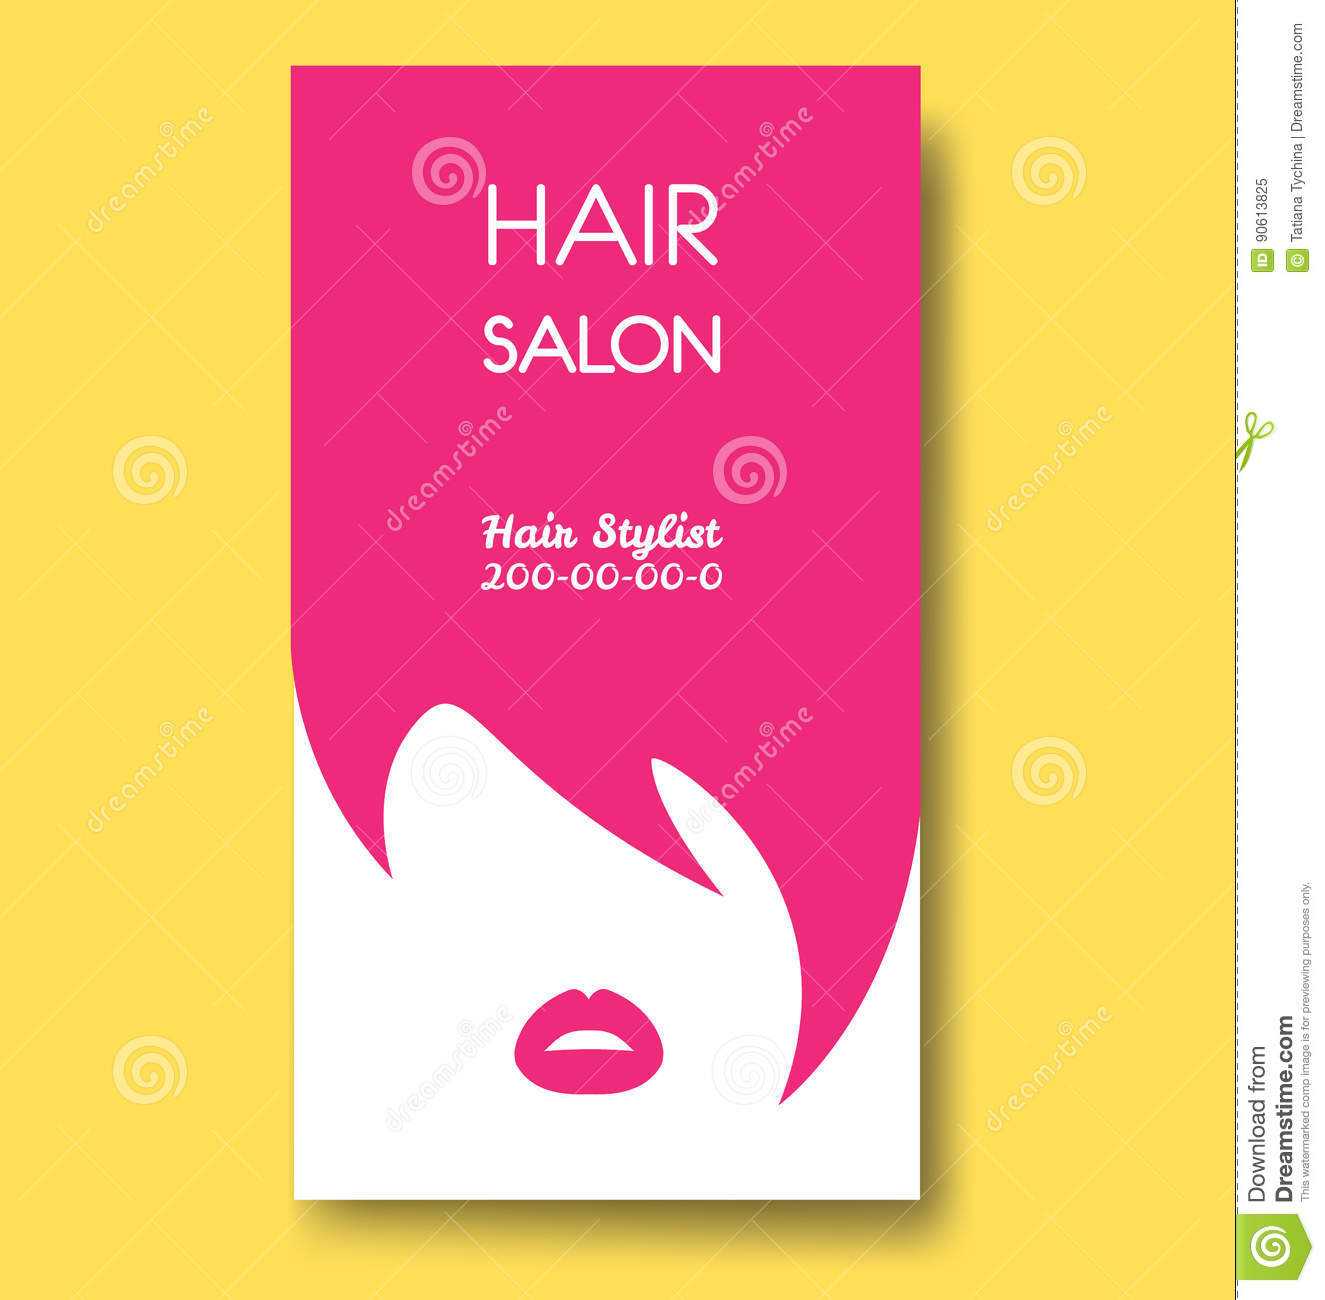 Hair Salon Business Card Templates With Pink Hair And Pink In Hair Salon Business Card Template